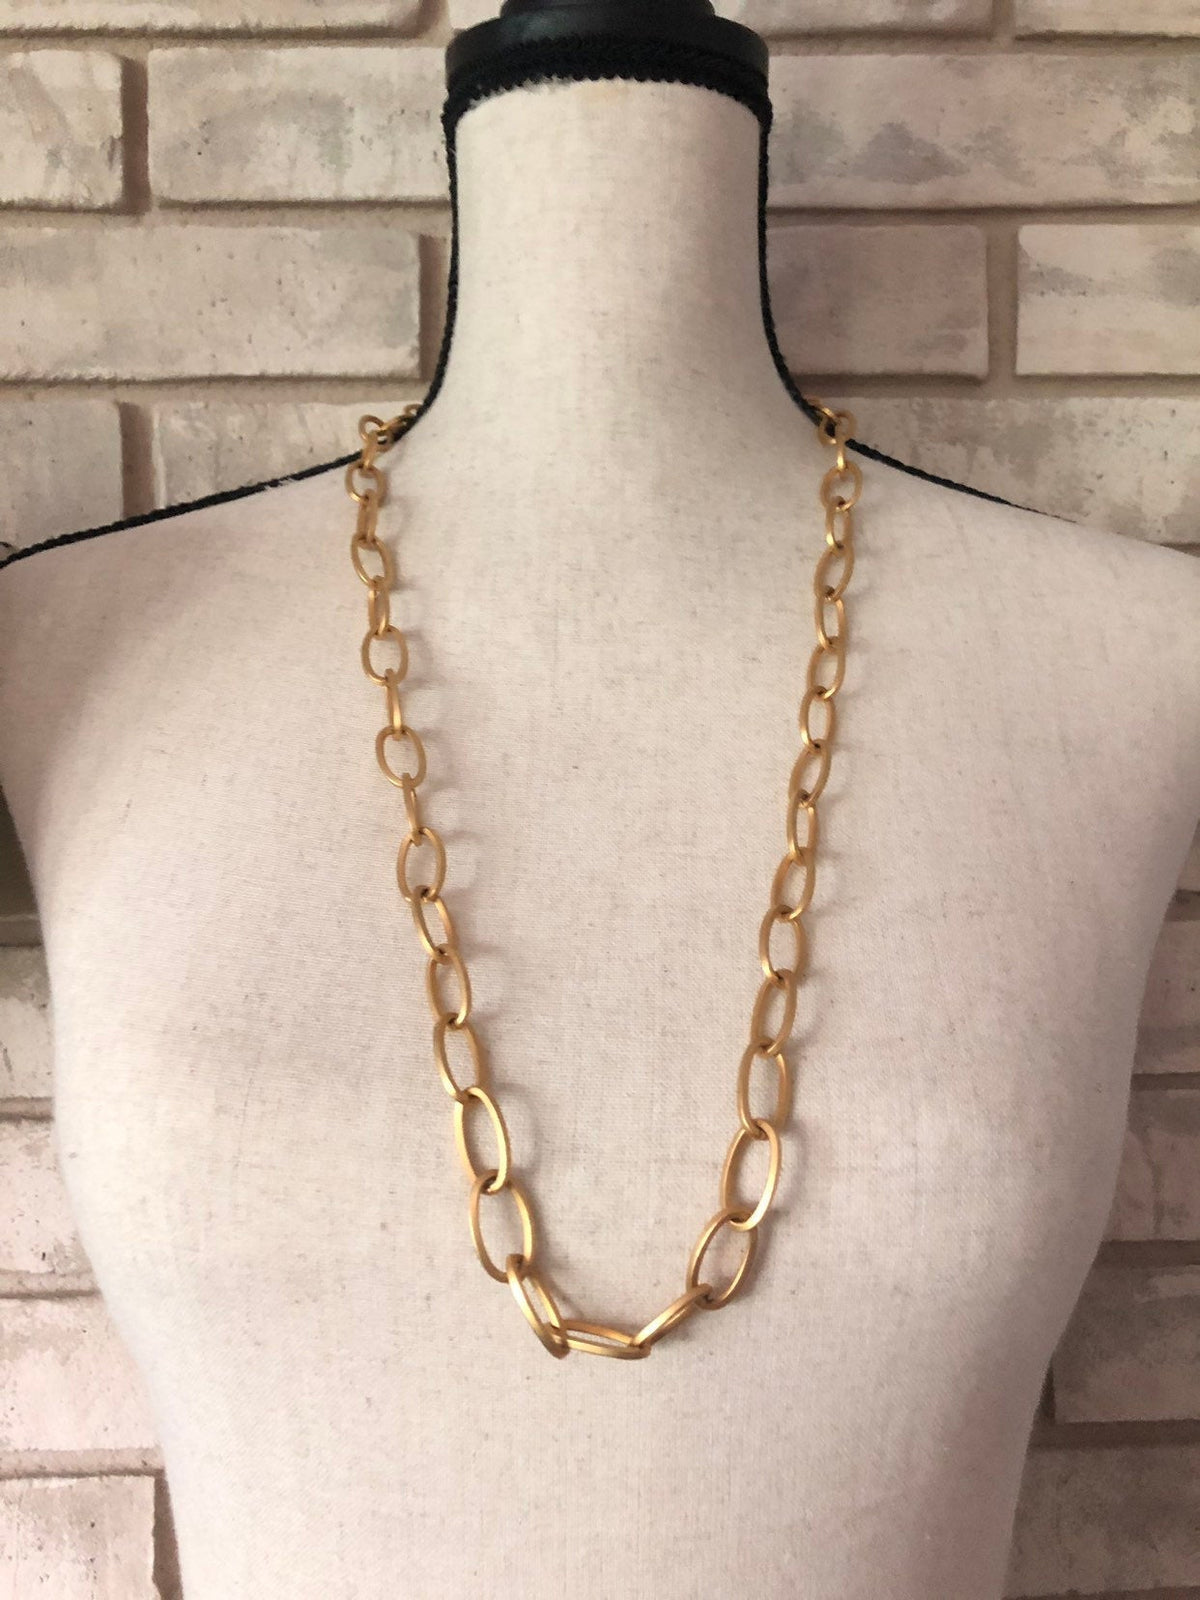 Carolee Classic Matt Gold Chain Vintage Necklace - 24 Wishes Vintage Jewelry